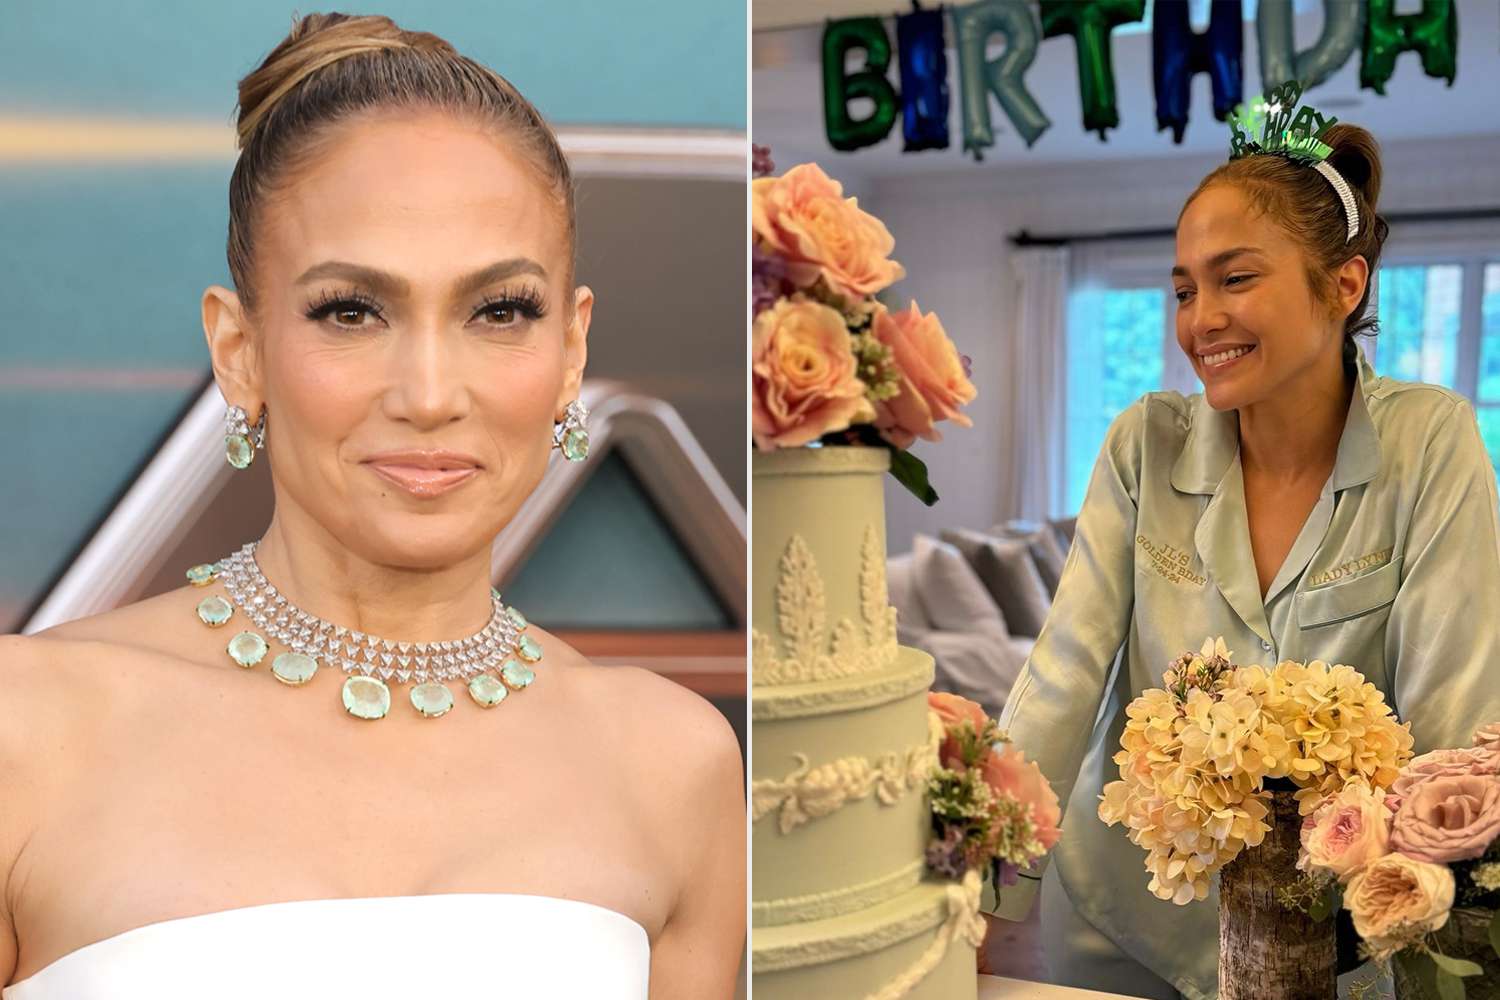 Jennifer Lopez Says She’s ‘Overwhelmed’ by 55th Birthday Wishes: ‘I Have Laughed, Smiled, Shed Some Tears’